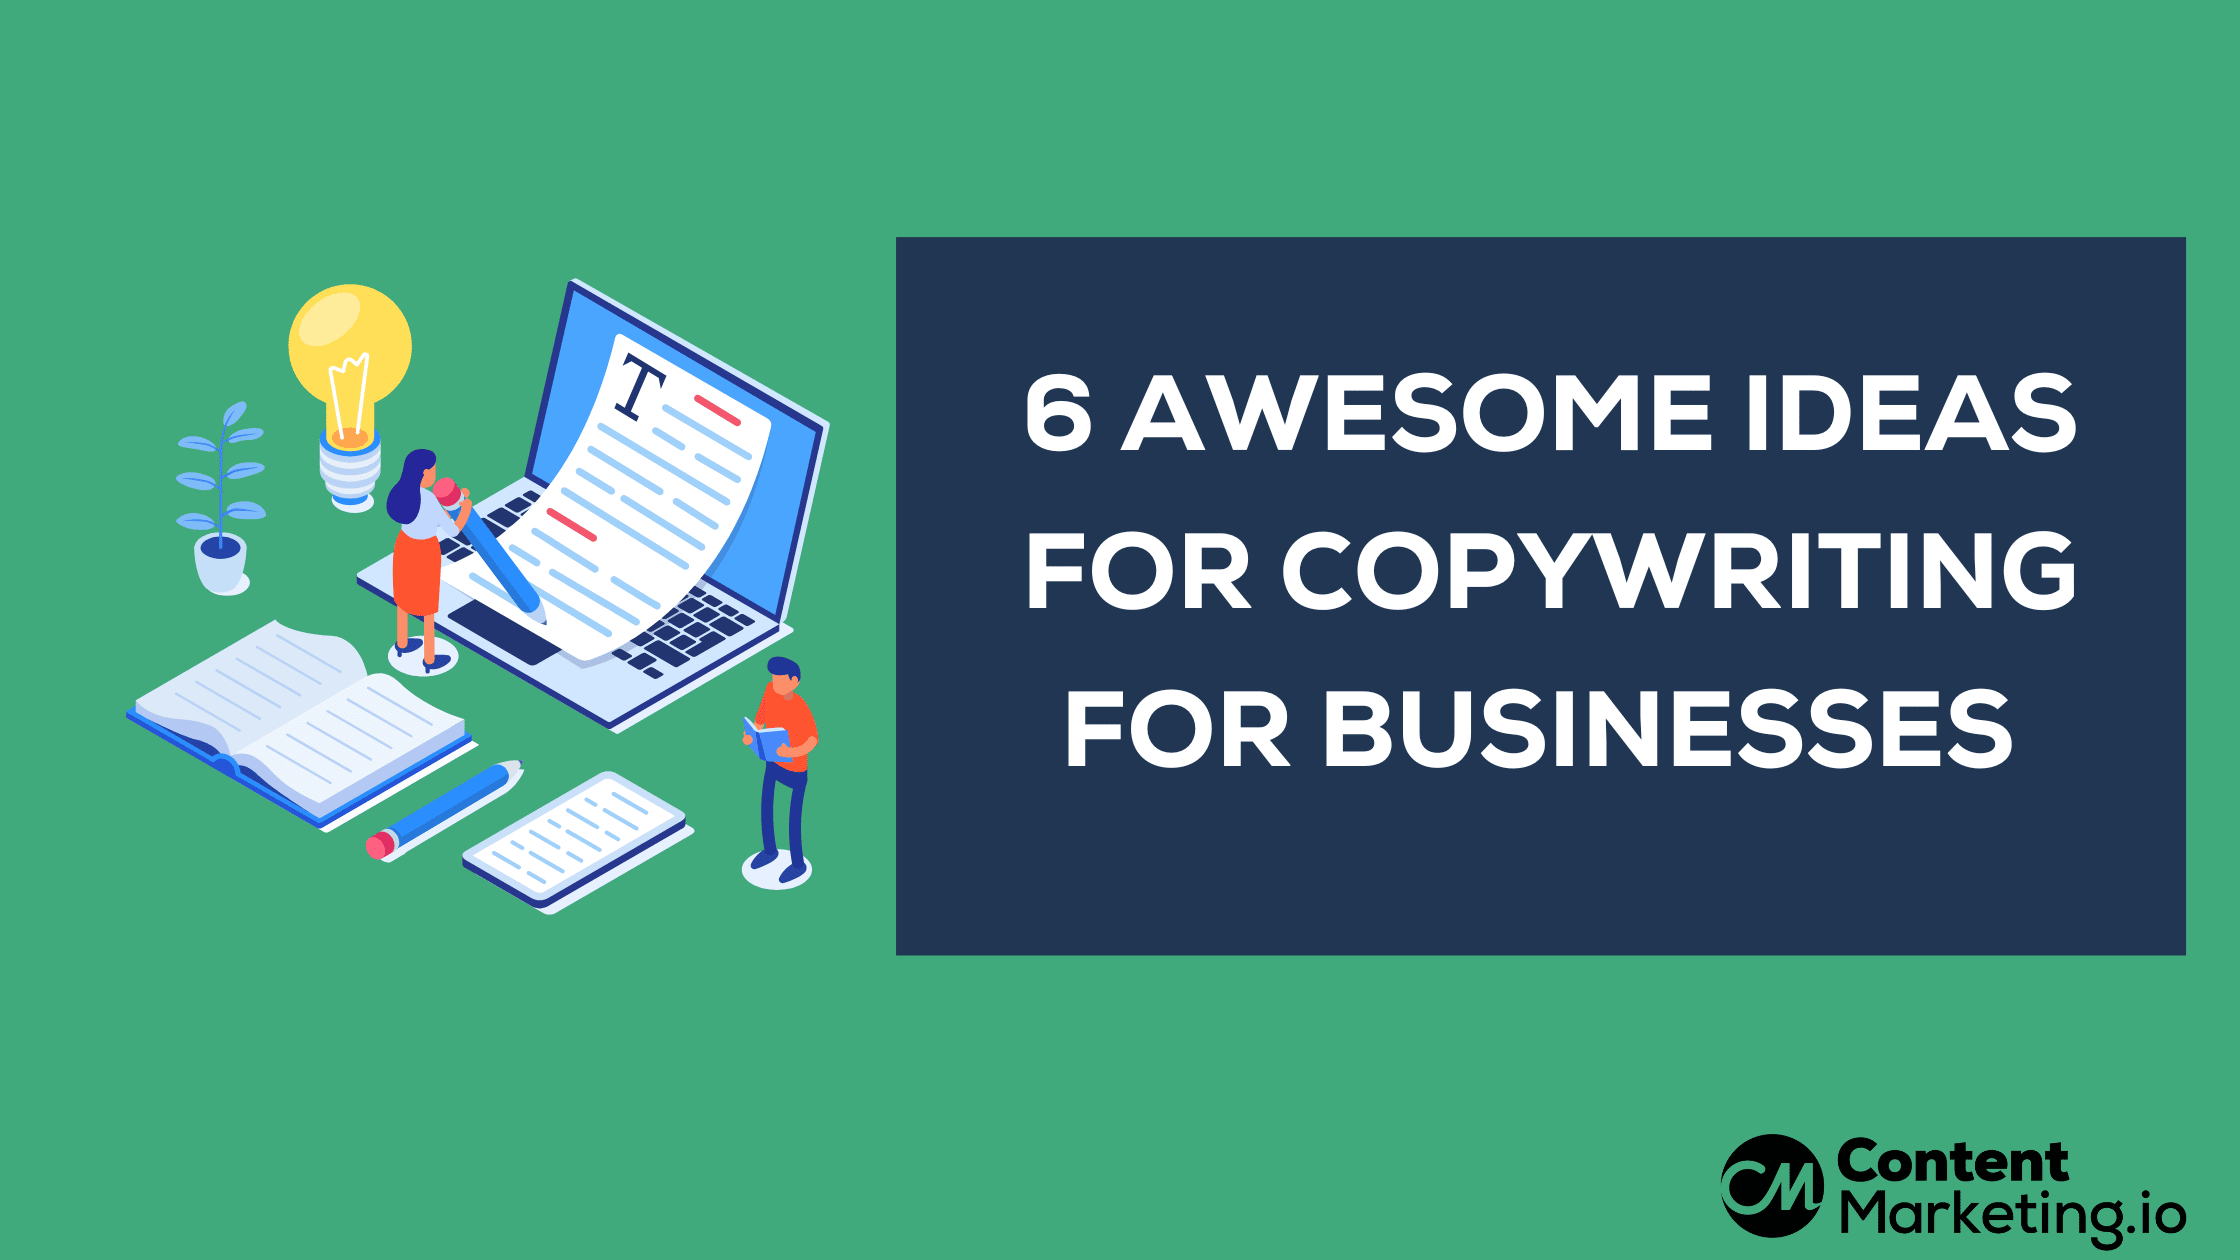 6 Awesome Ideas for Copywriting for Businesses That Impact Sales